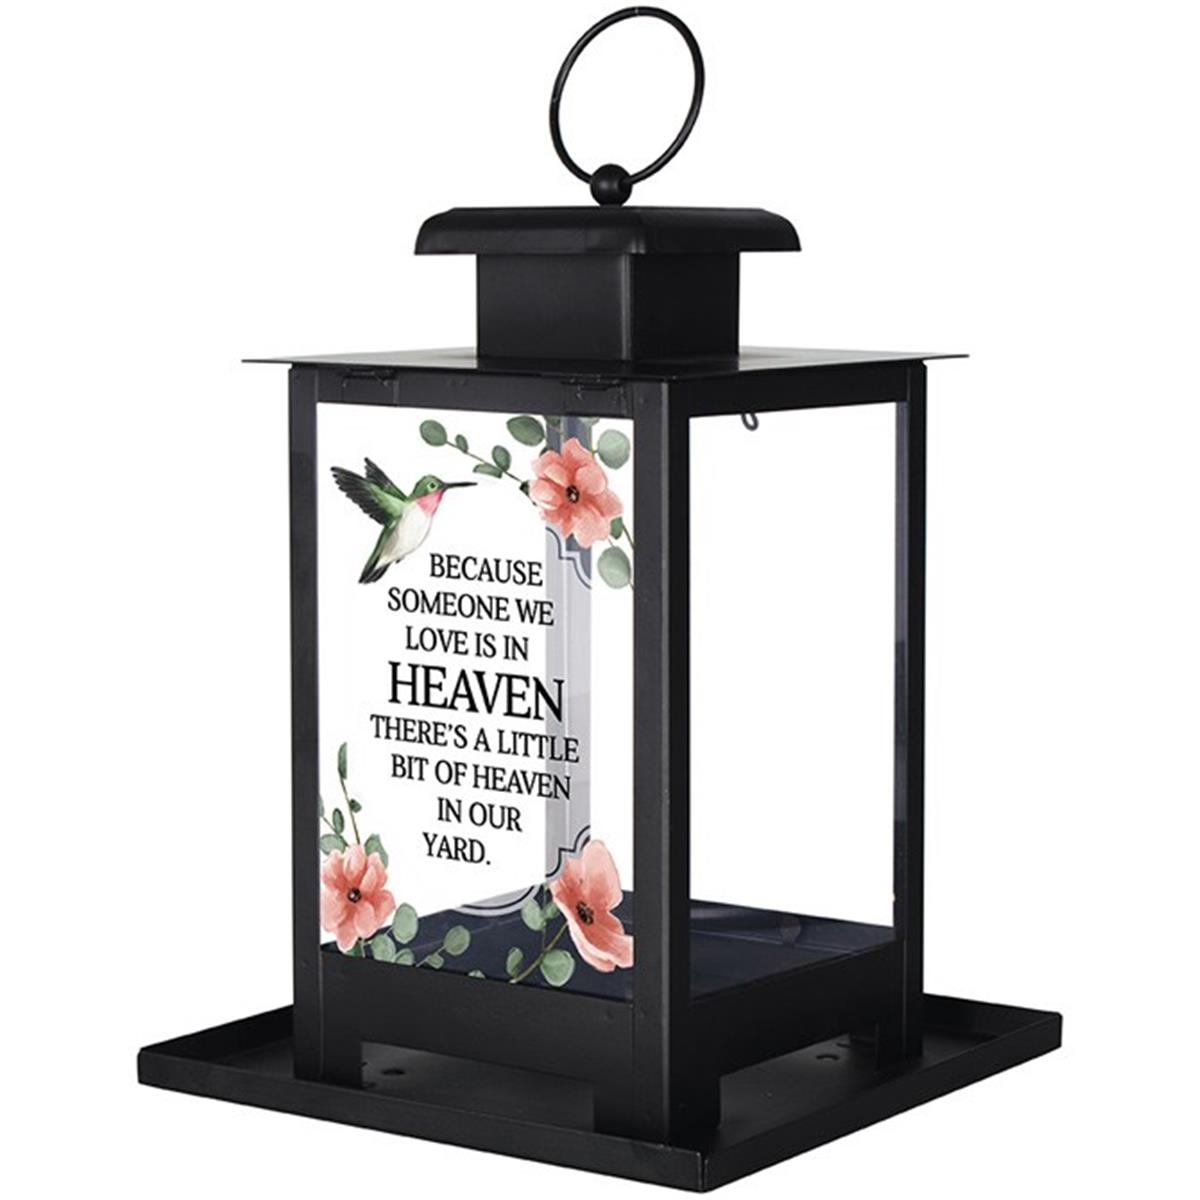 Picture of Carson Home Accents 231711 12 x 7 x 7 in. Heaven Bird Feeder